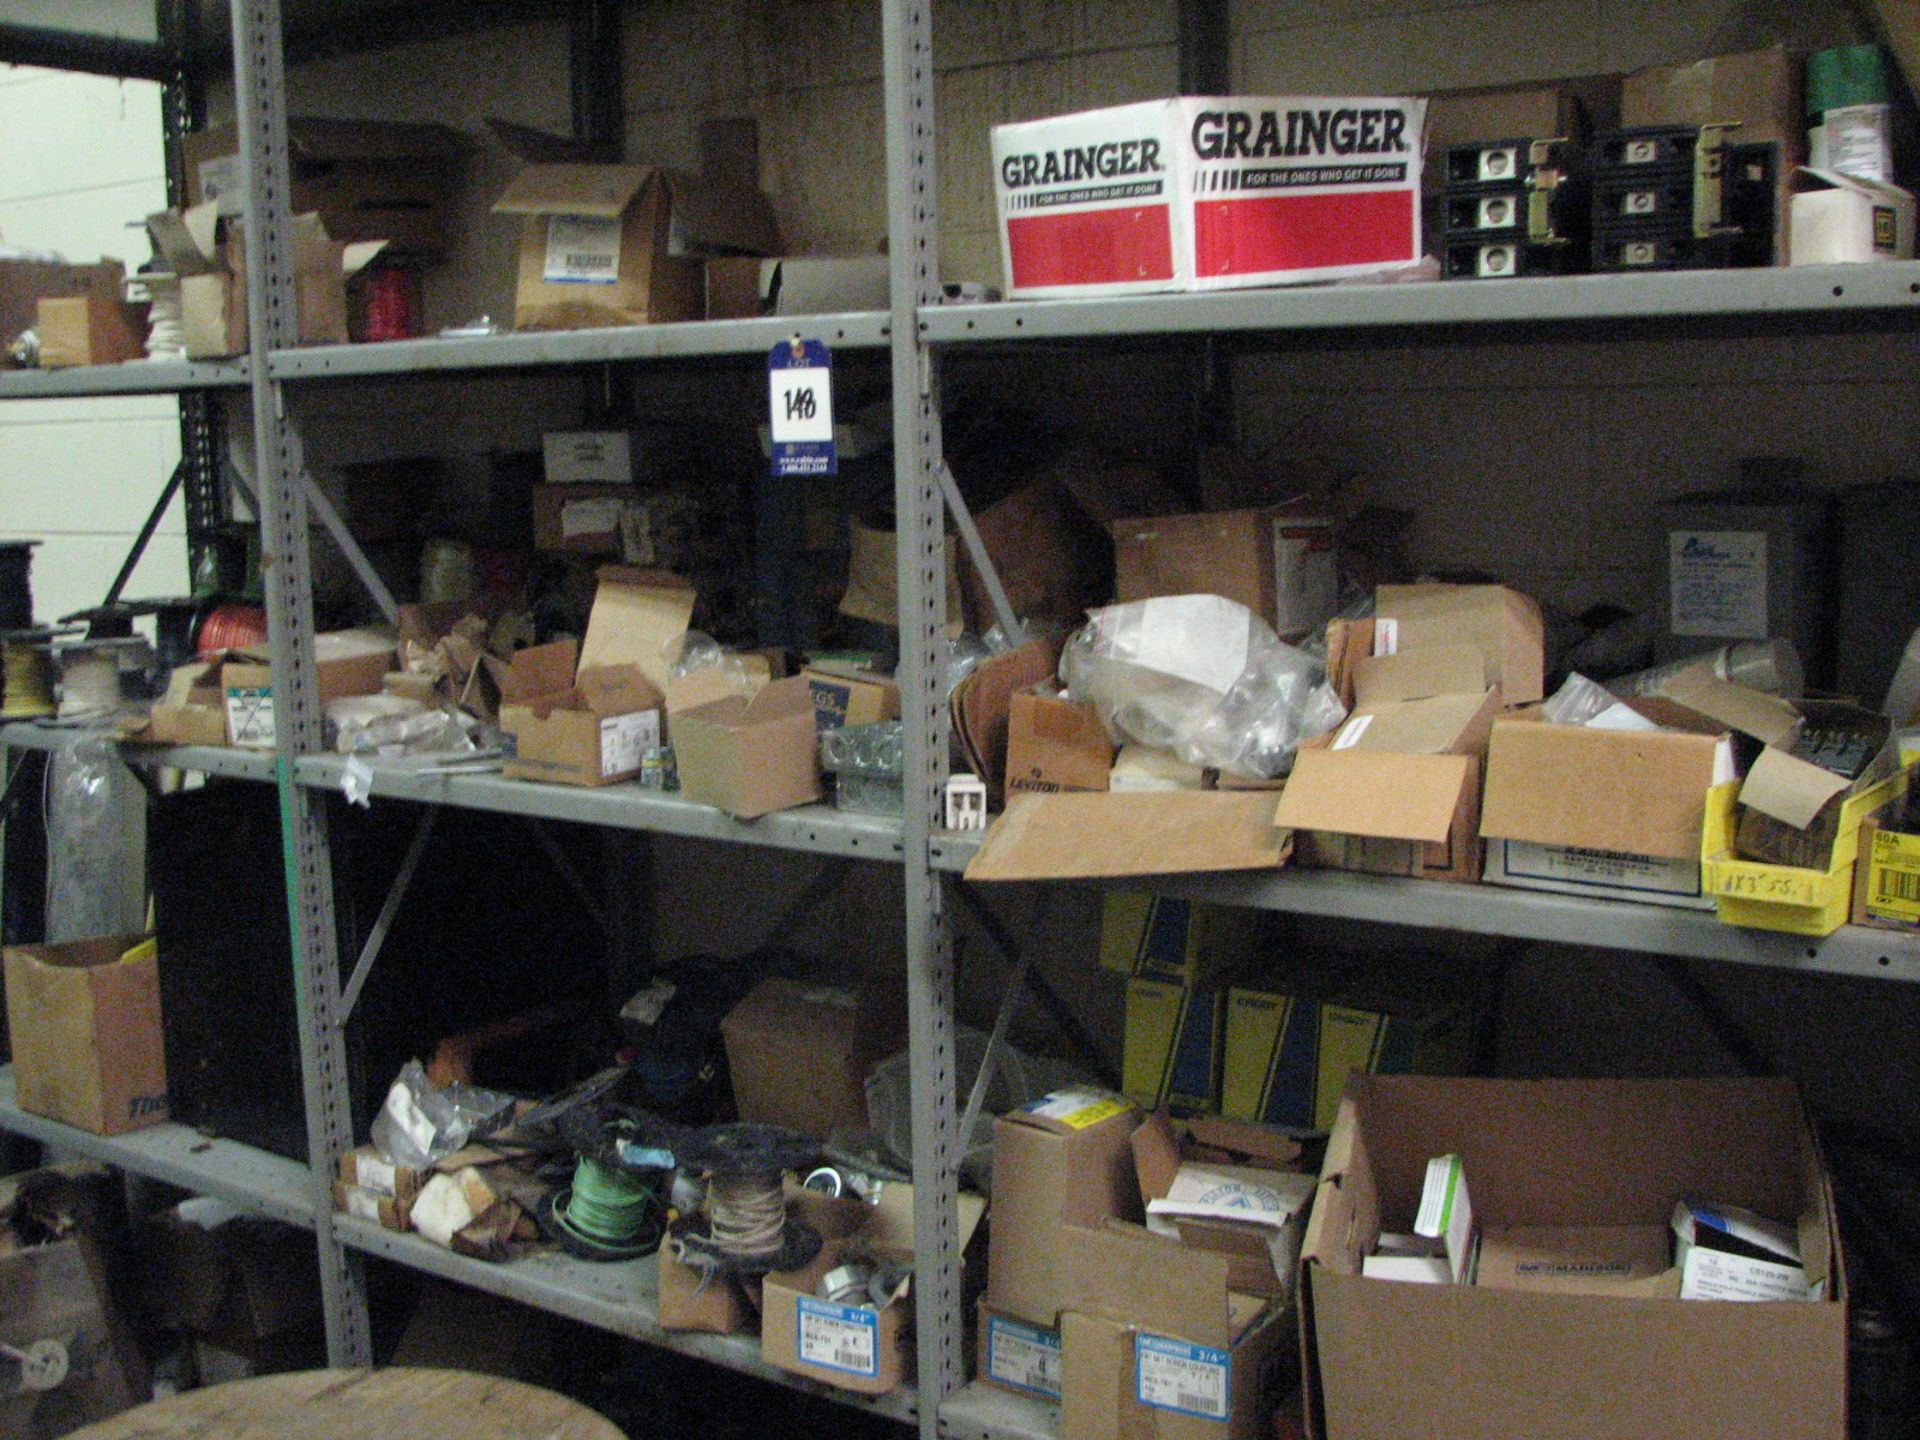 [Lot] Miscellaneous galvanized & PVC, fittings, elbows, couplers, sleeves with (2) metal shelving,